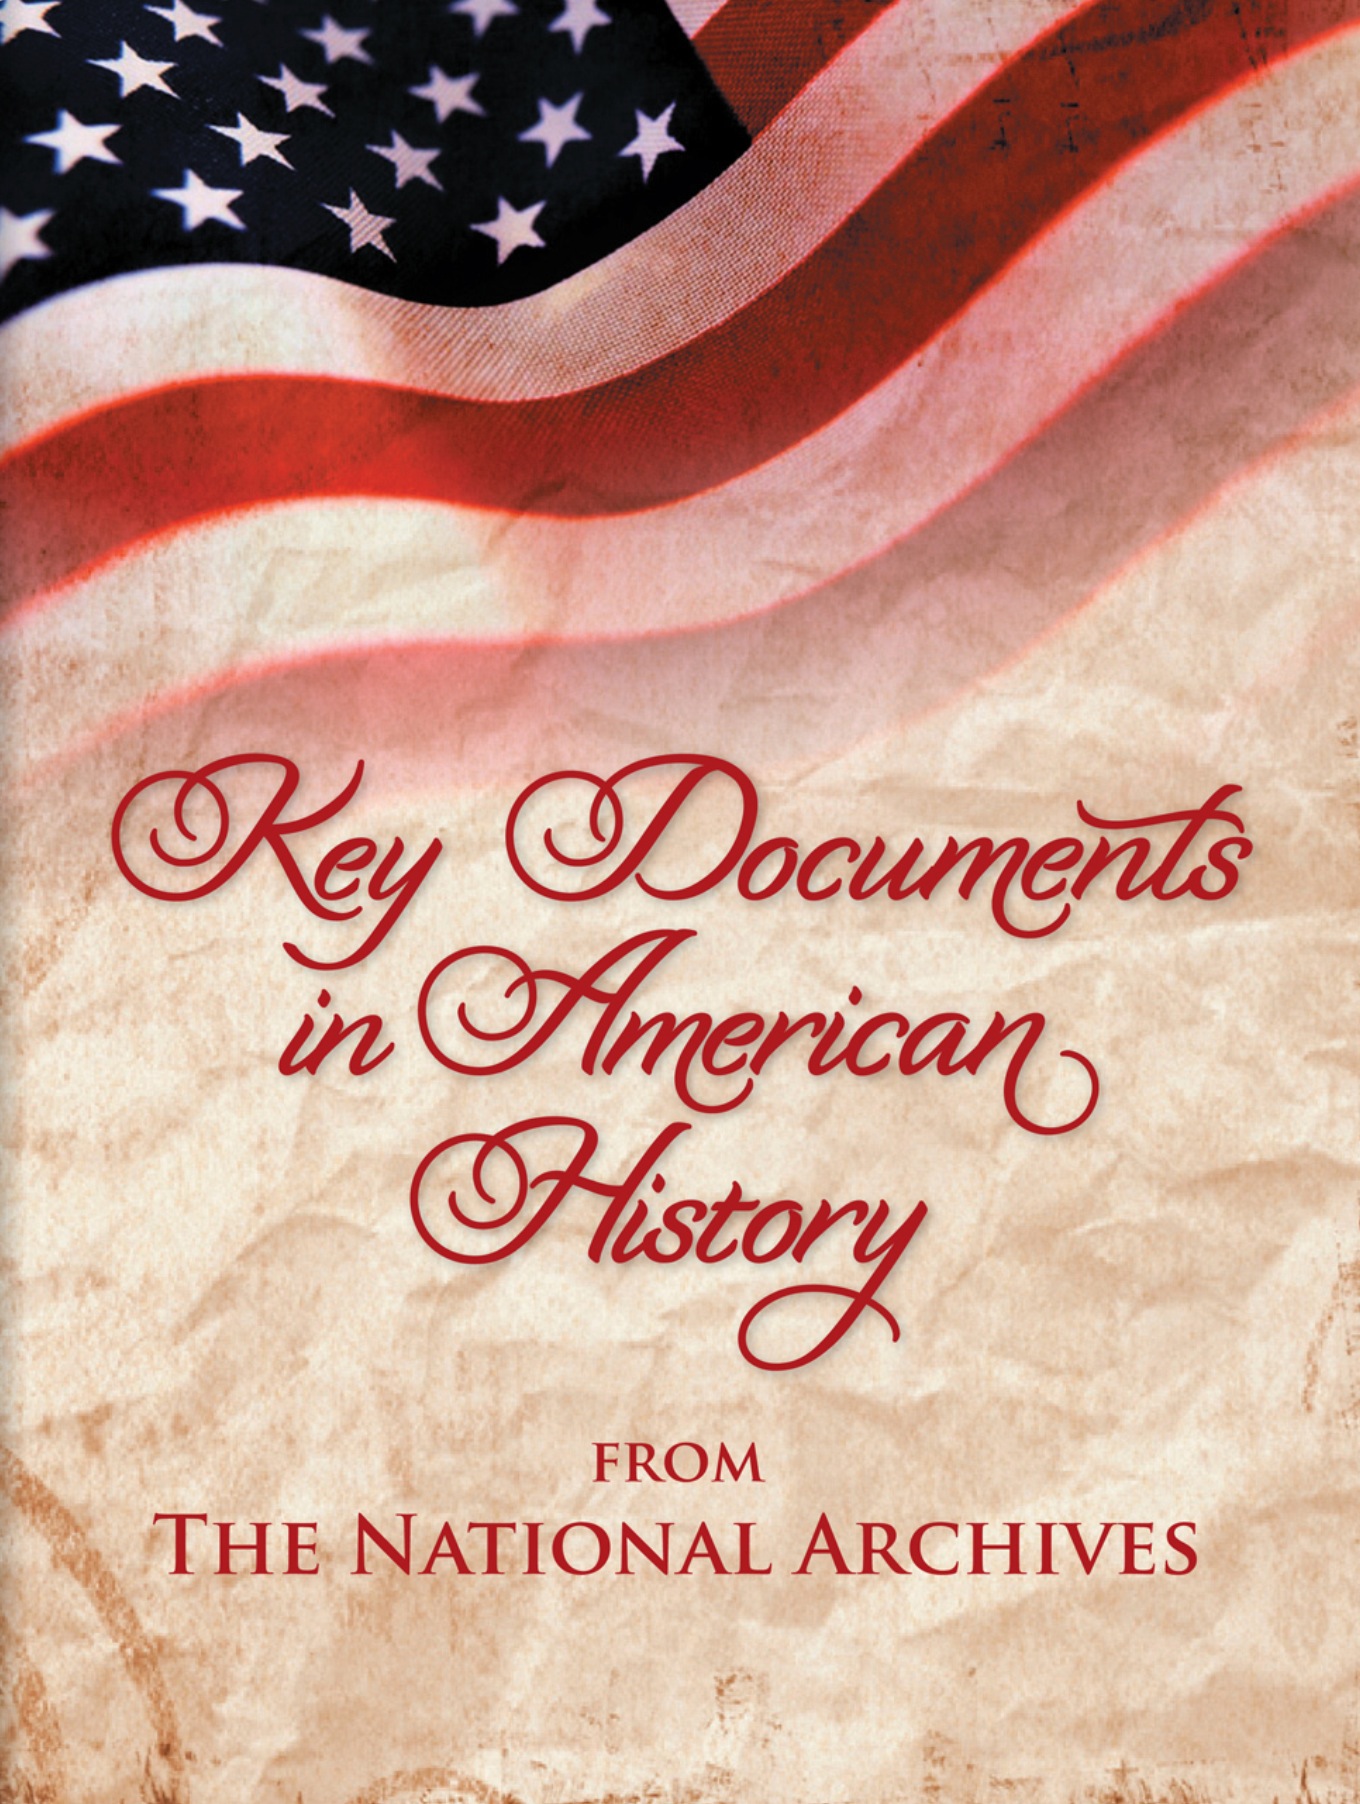 Key Documents in American History: The National Archives